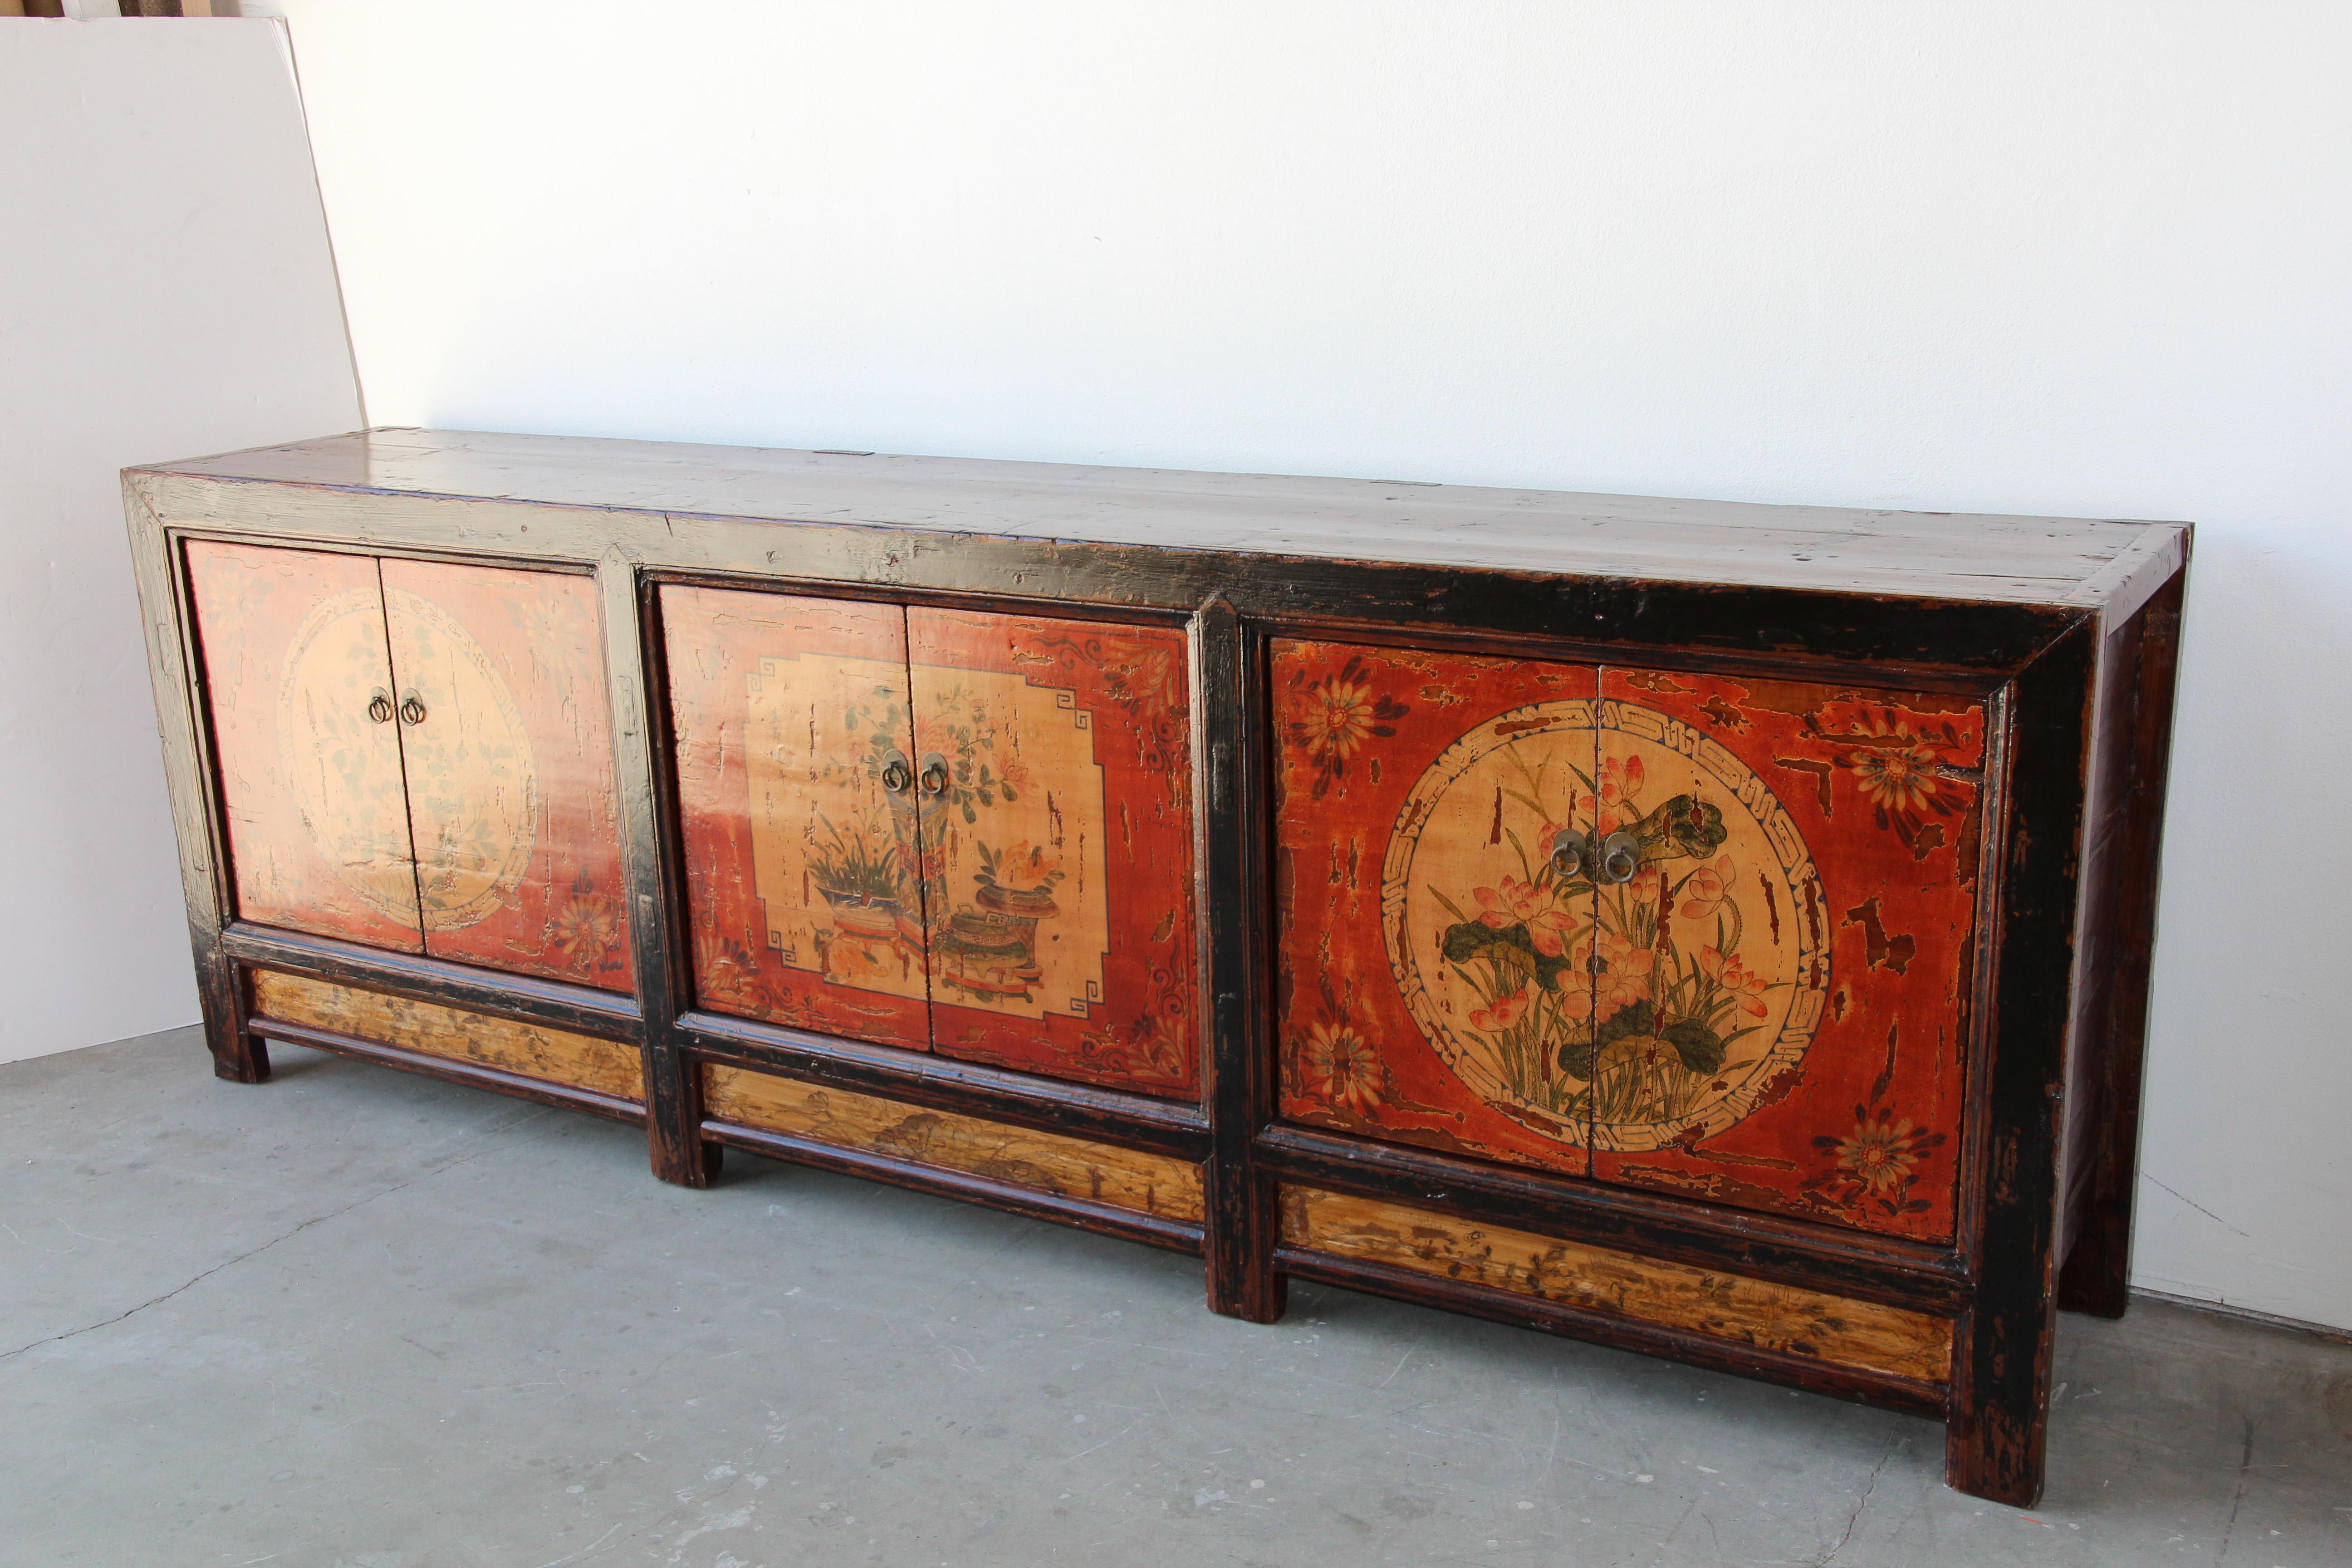 Handcrafted Mongolian sideboard in polychrome floral designs hand painted in front.
Mongolian painted storage cabinet or sideboard. 
Very elegant Bohemian style with simple lines, distressed antique look.
Floral design hand painted in rich red,